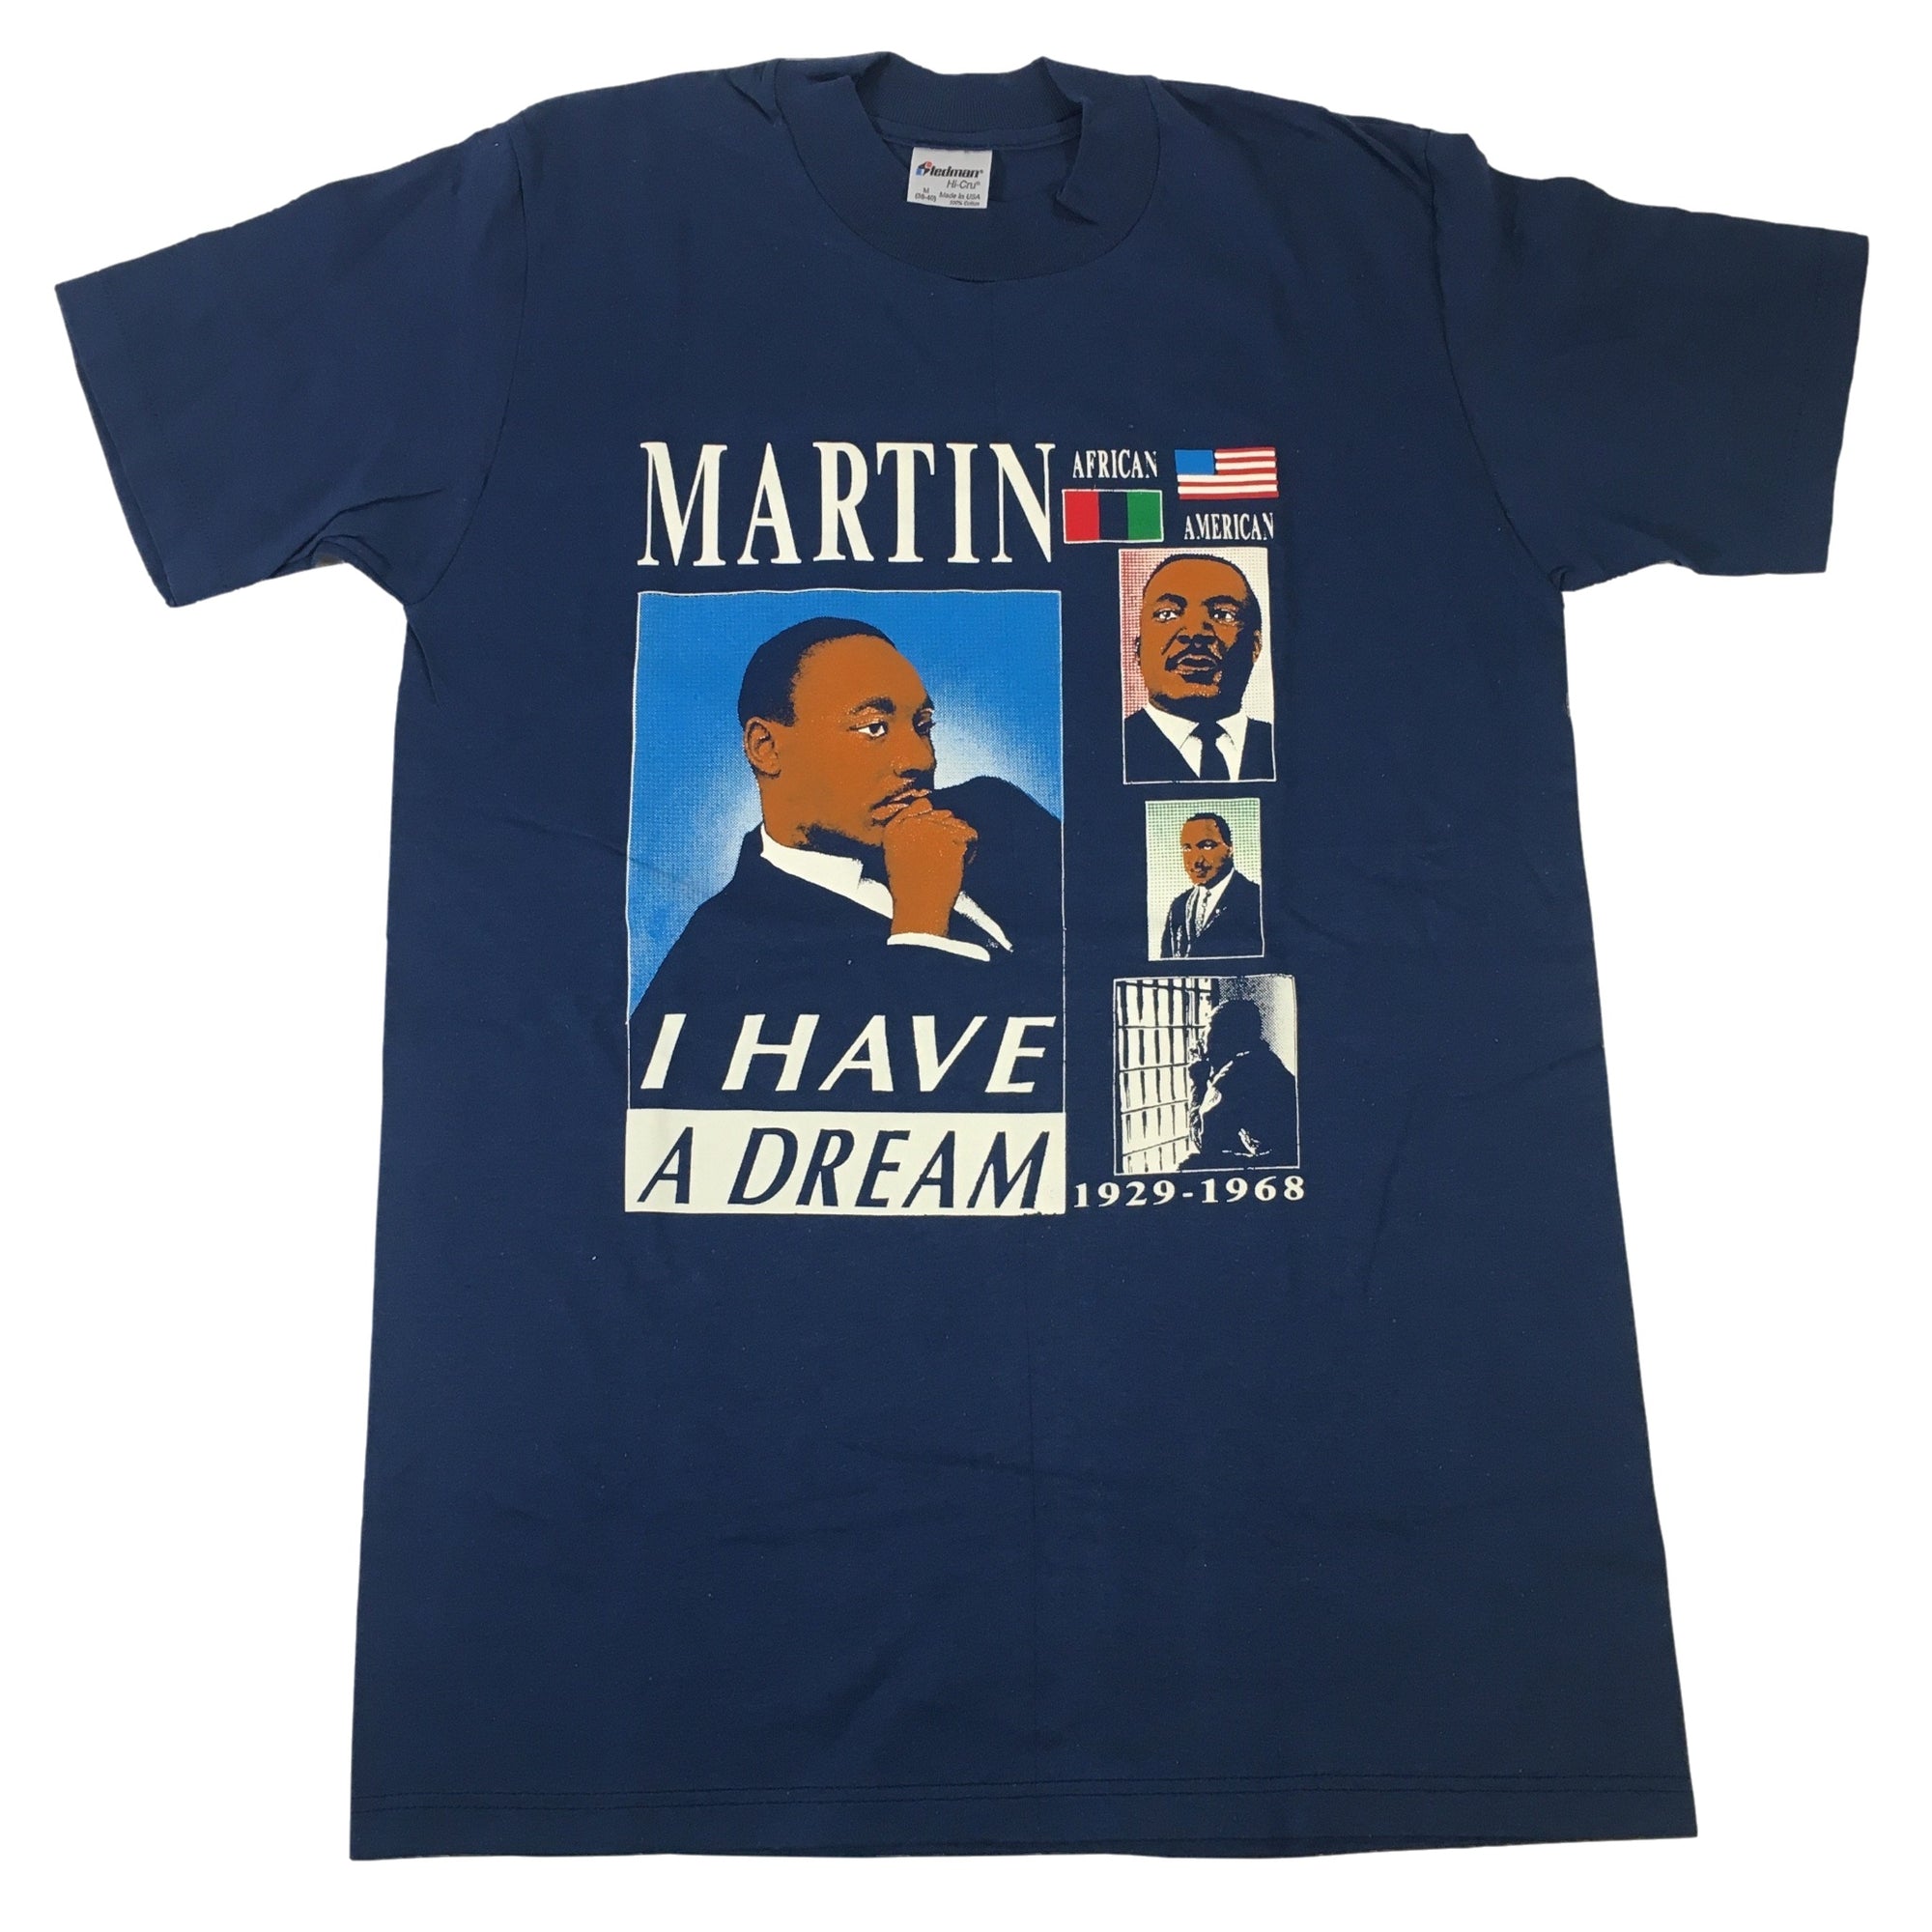 Vintage Martin Luther King "I Have A Dream" T-Shirt - jointcustodydc